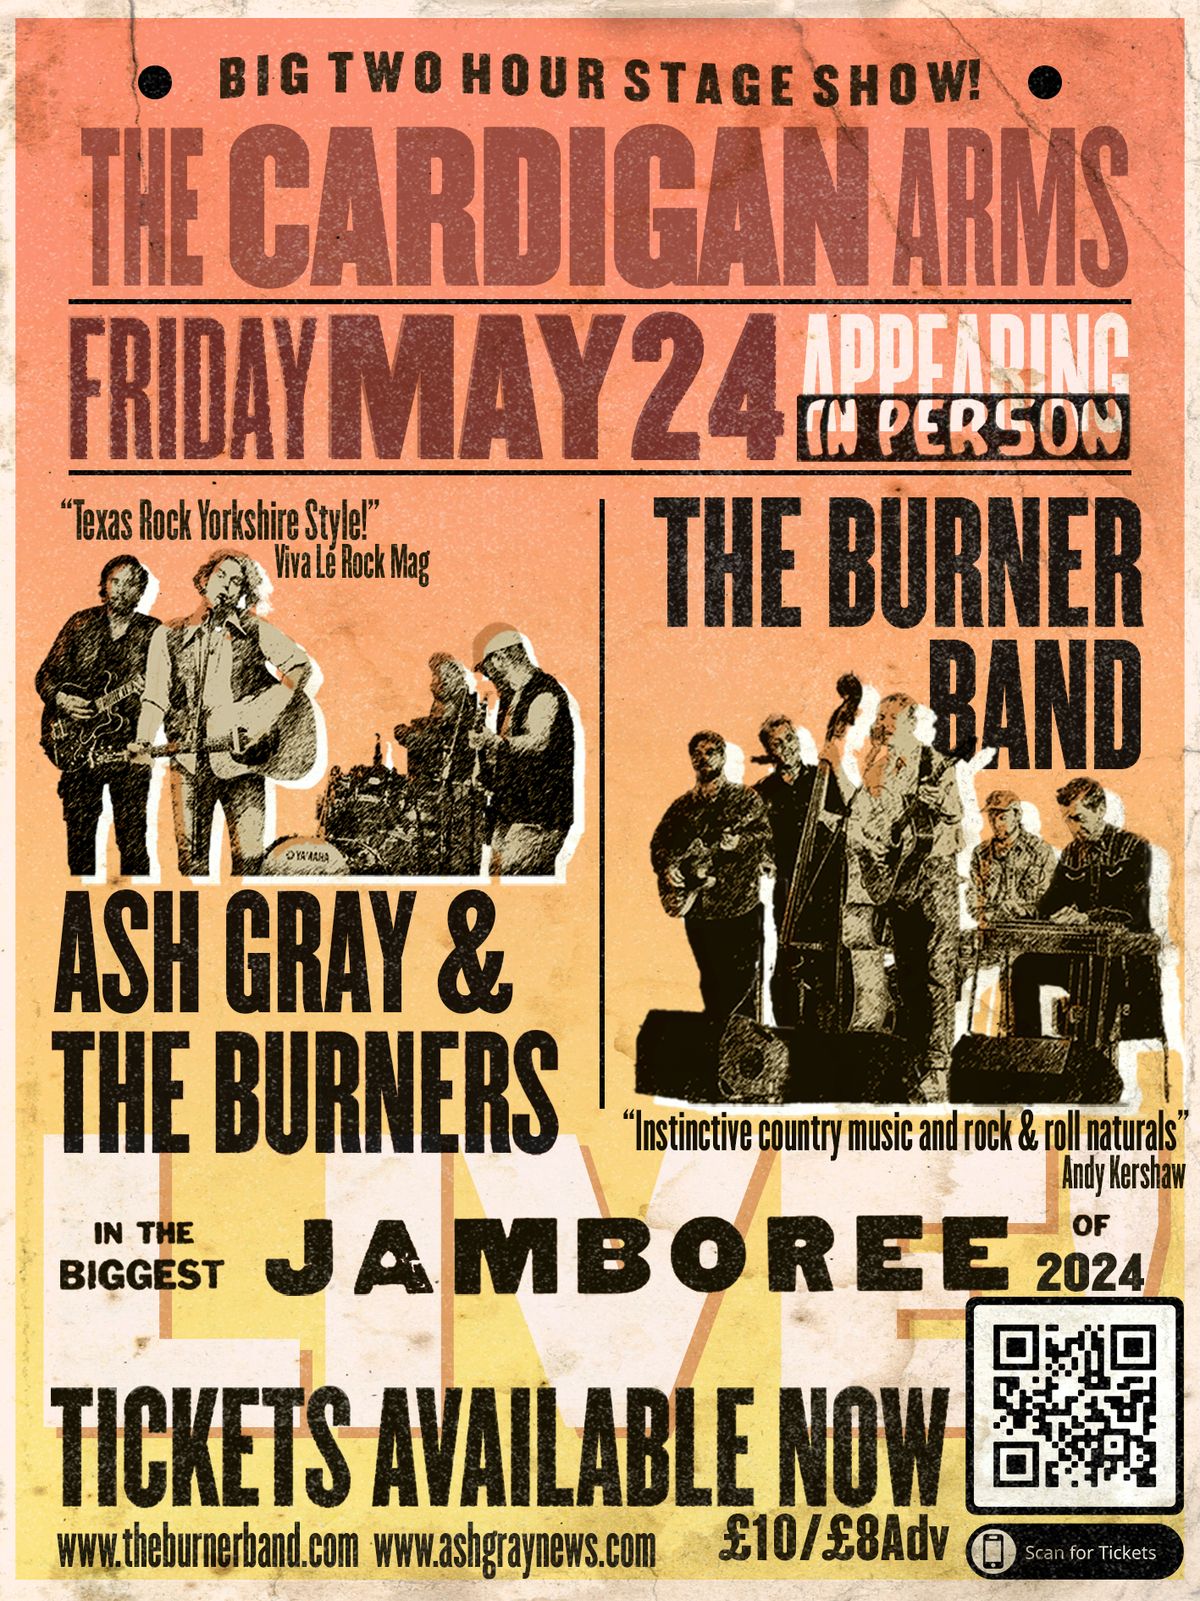 BURNERS DOUBLE HEADER! The Burner Band and Ash Gray & The Burners